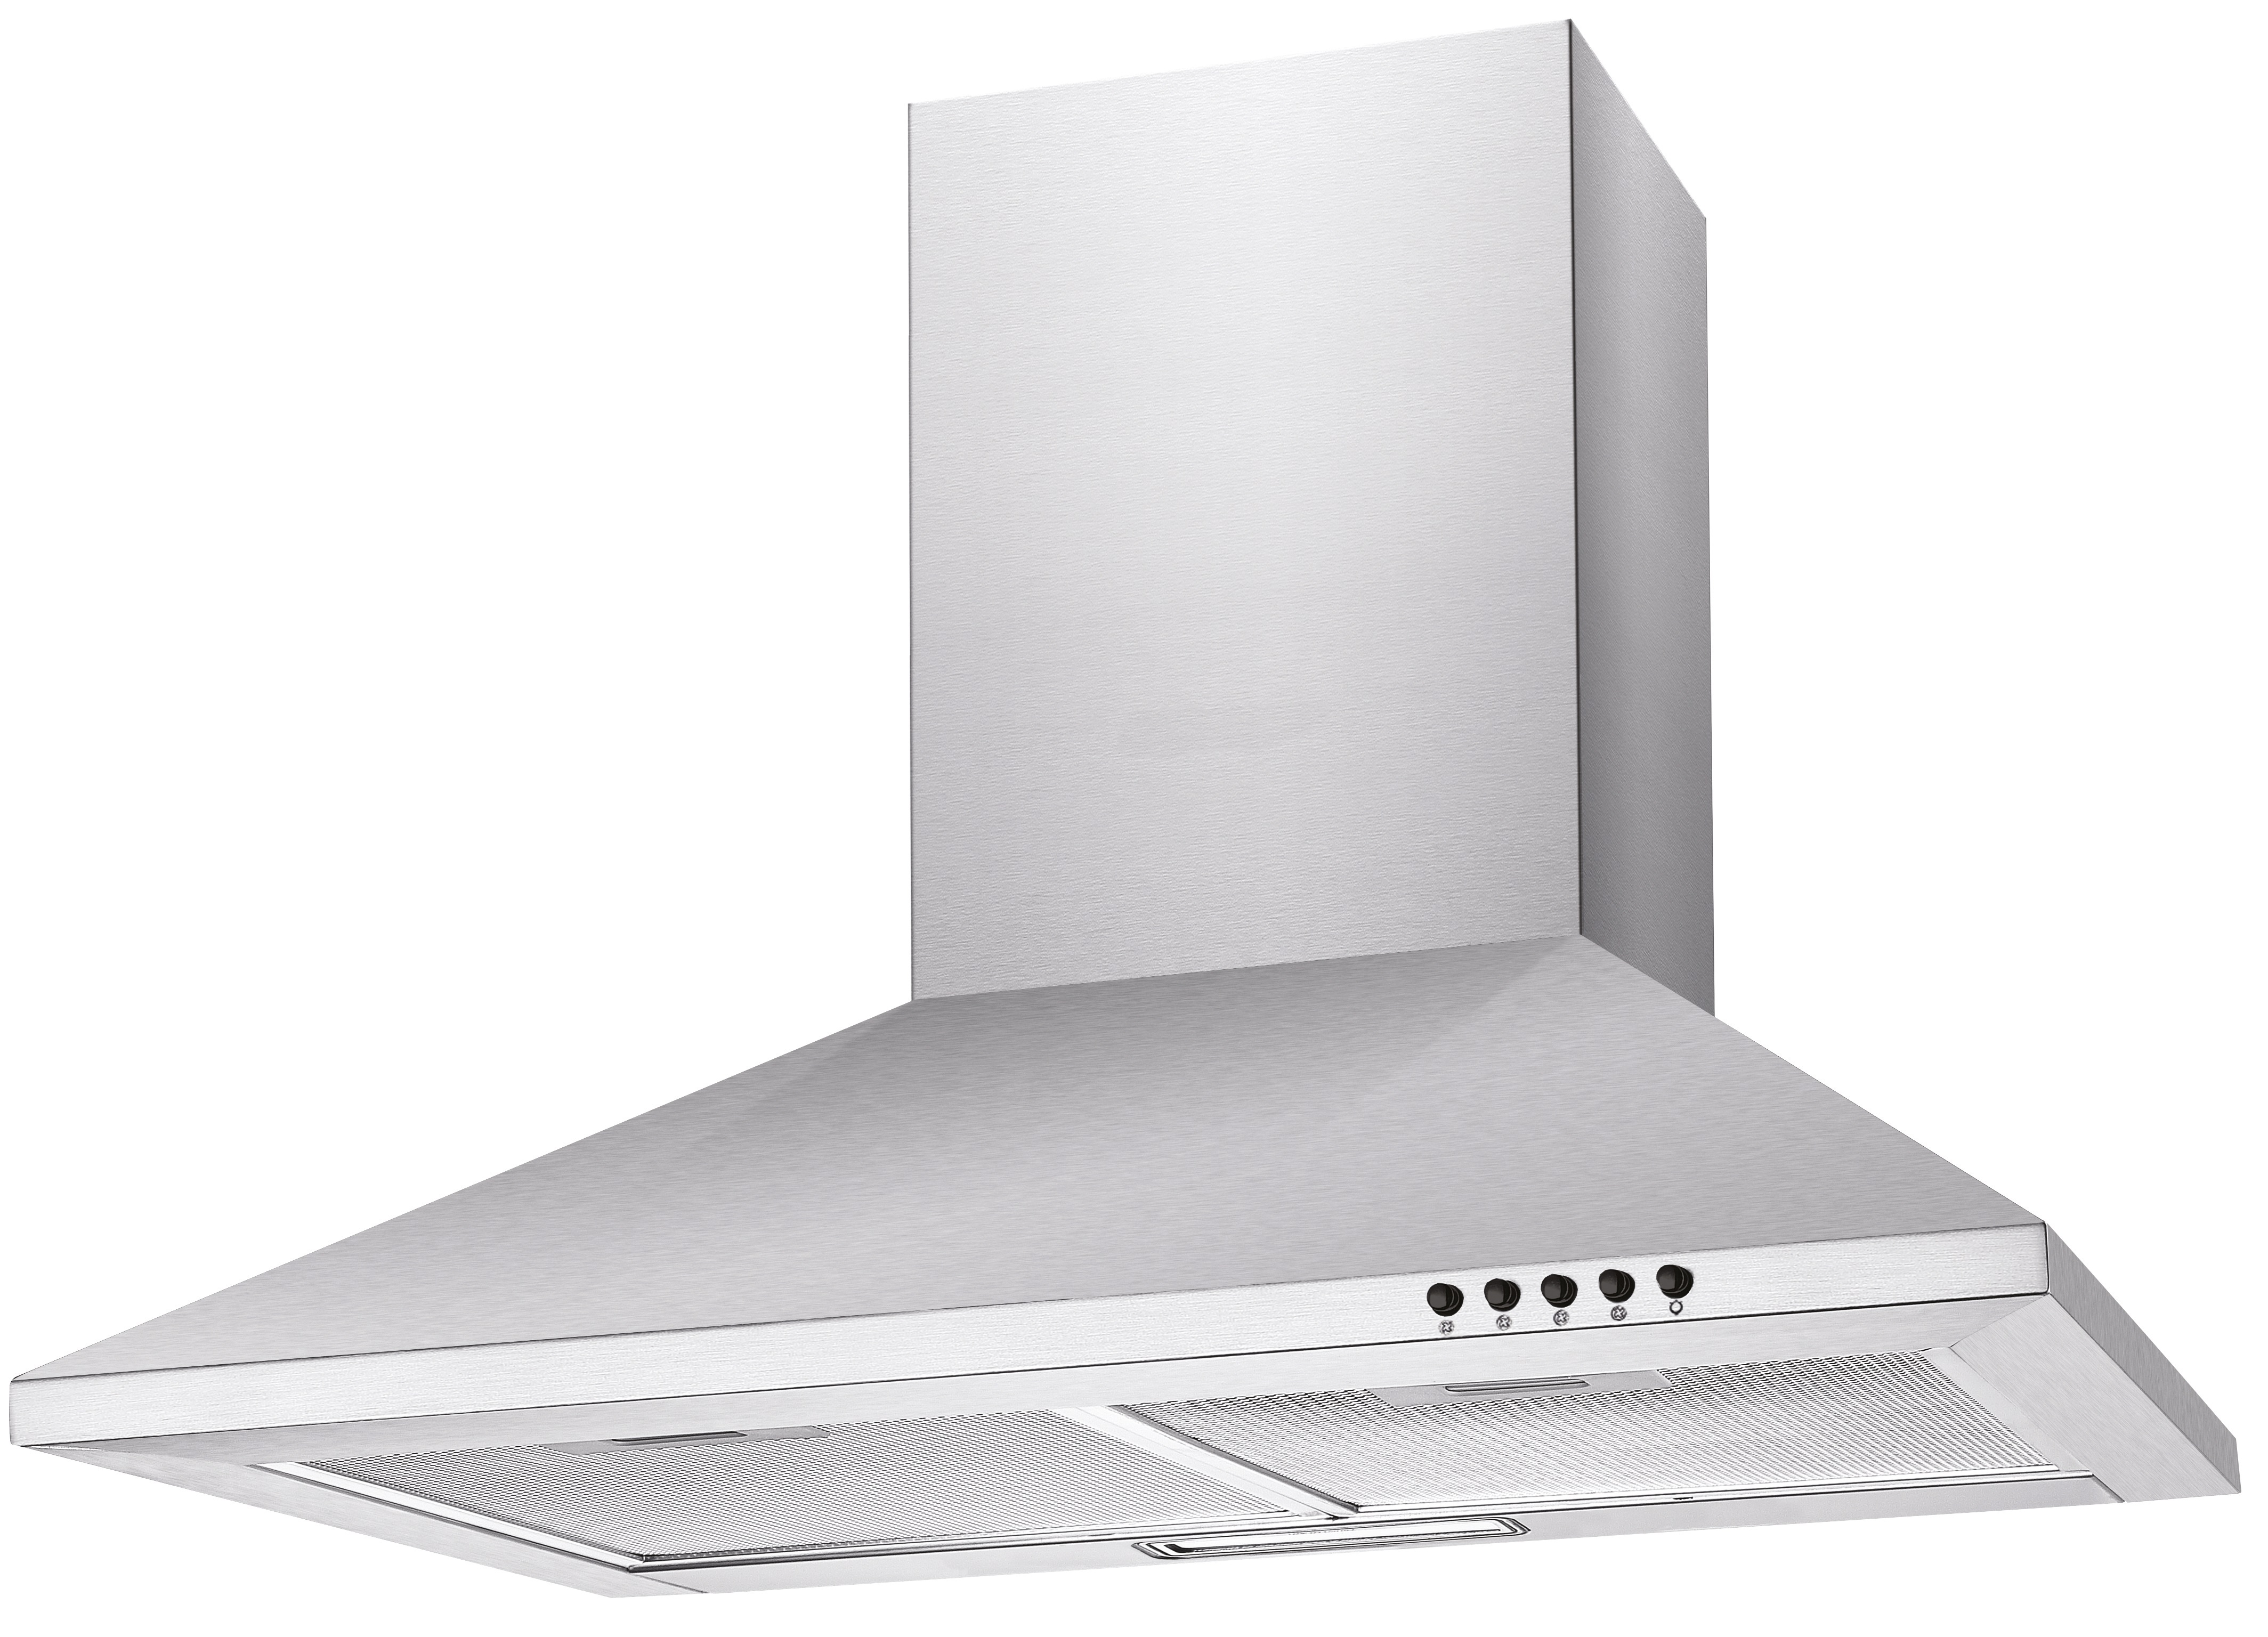 CANDY 60CM CHIMNEY HOOD S/S INC CARBON FILTER